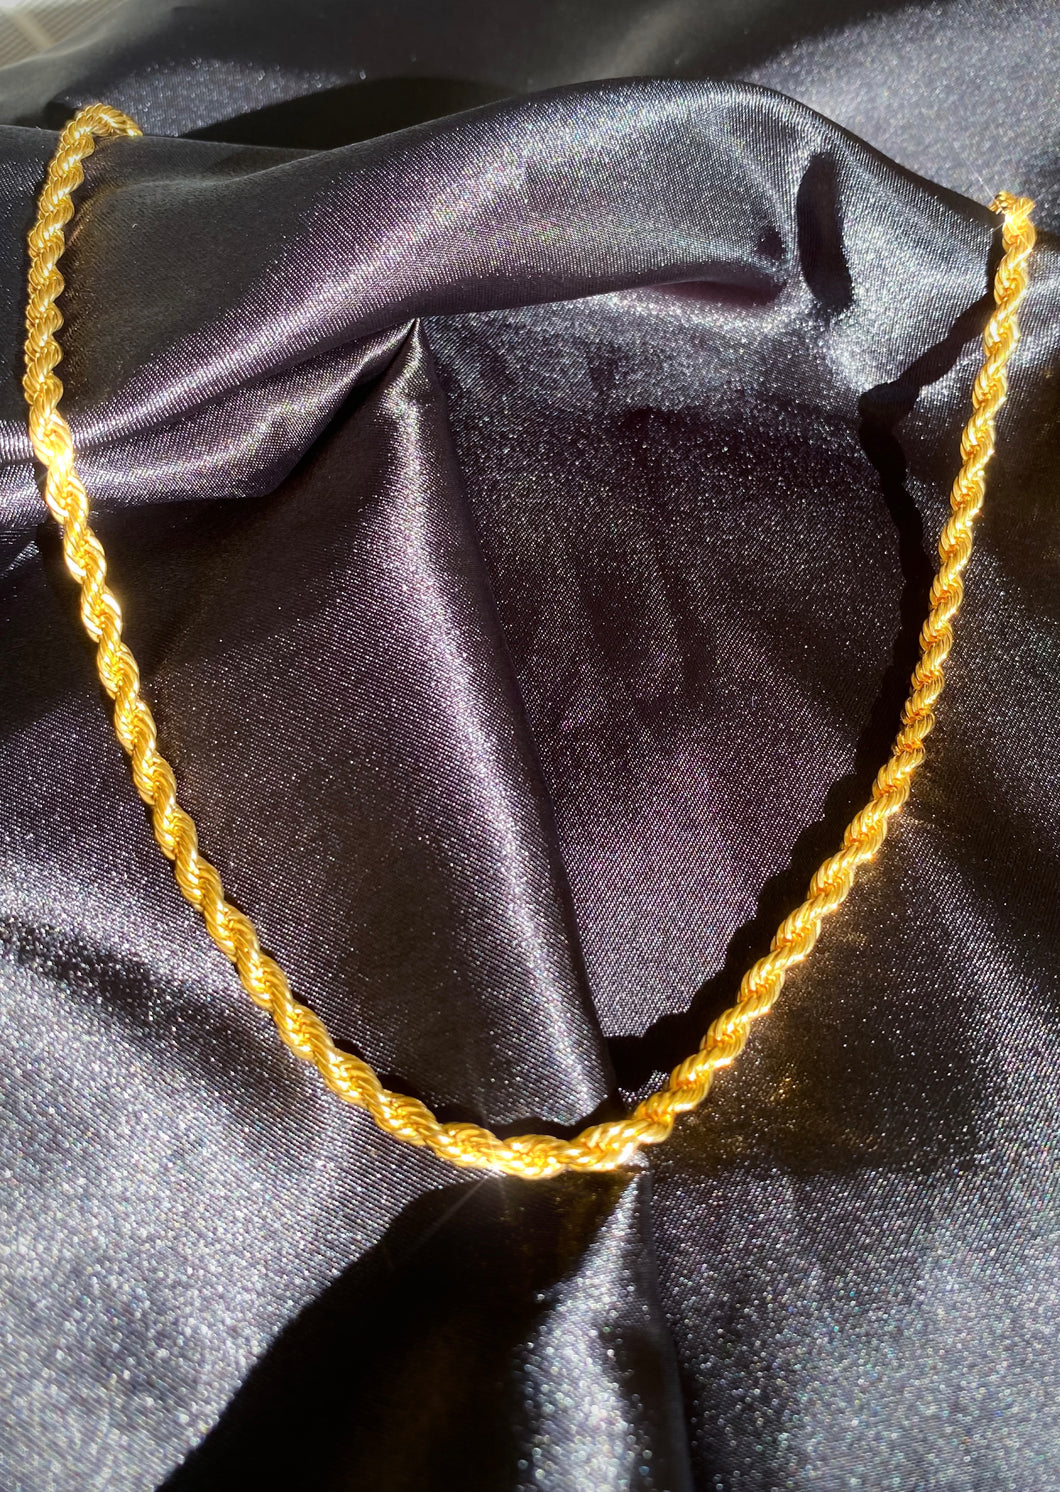 18k Rope Chain Necklace